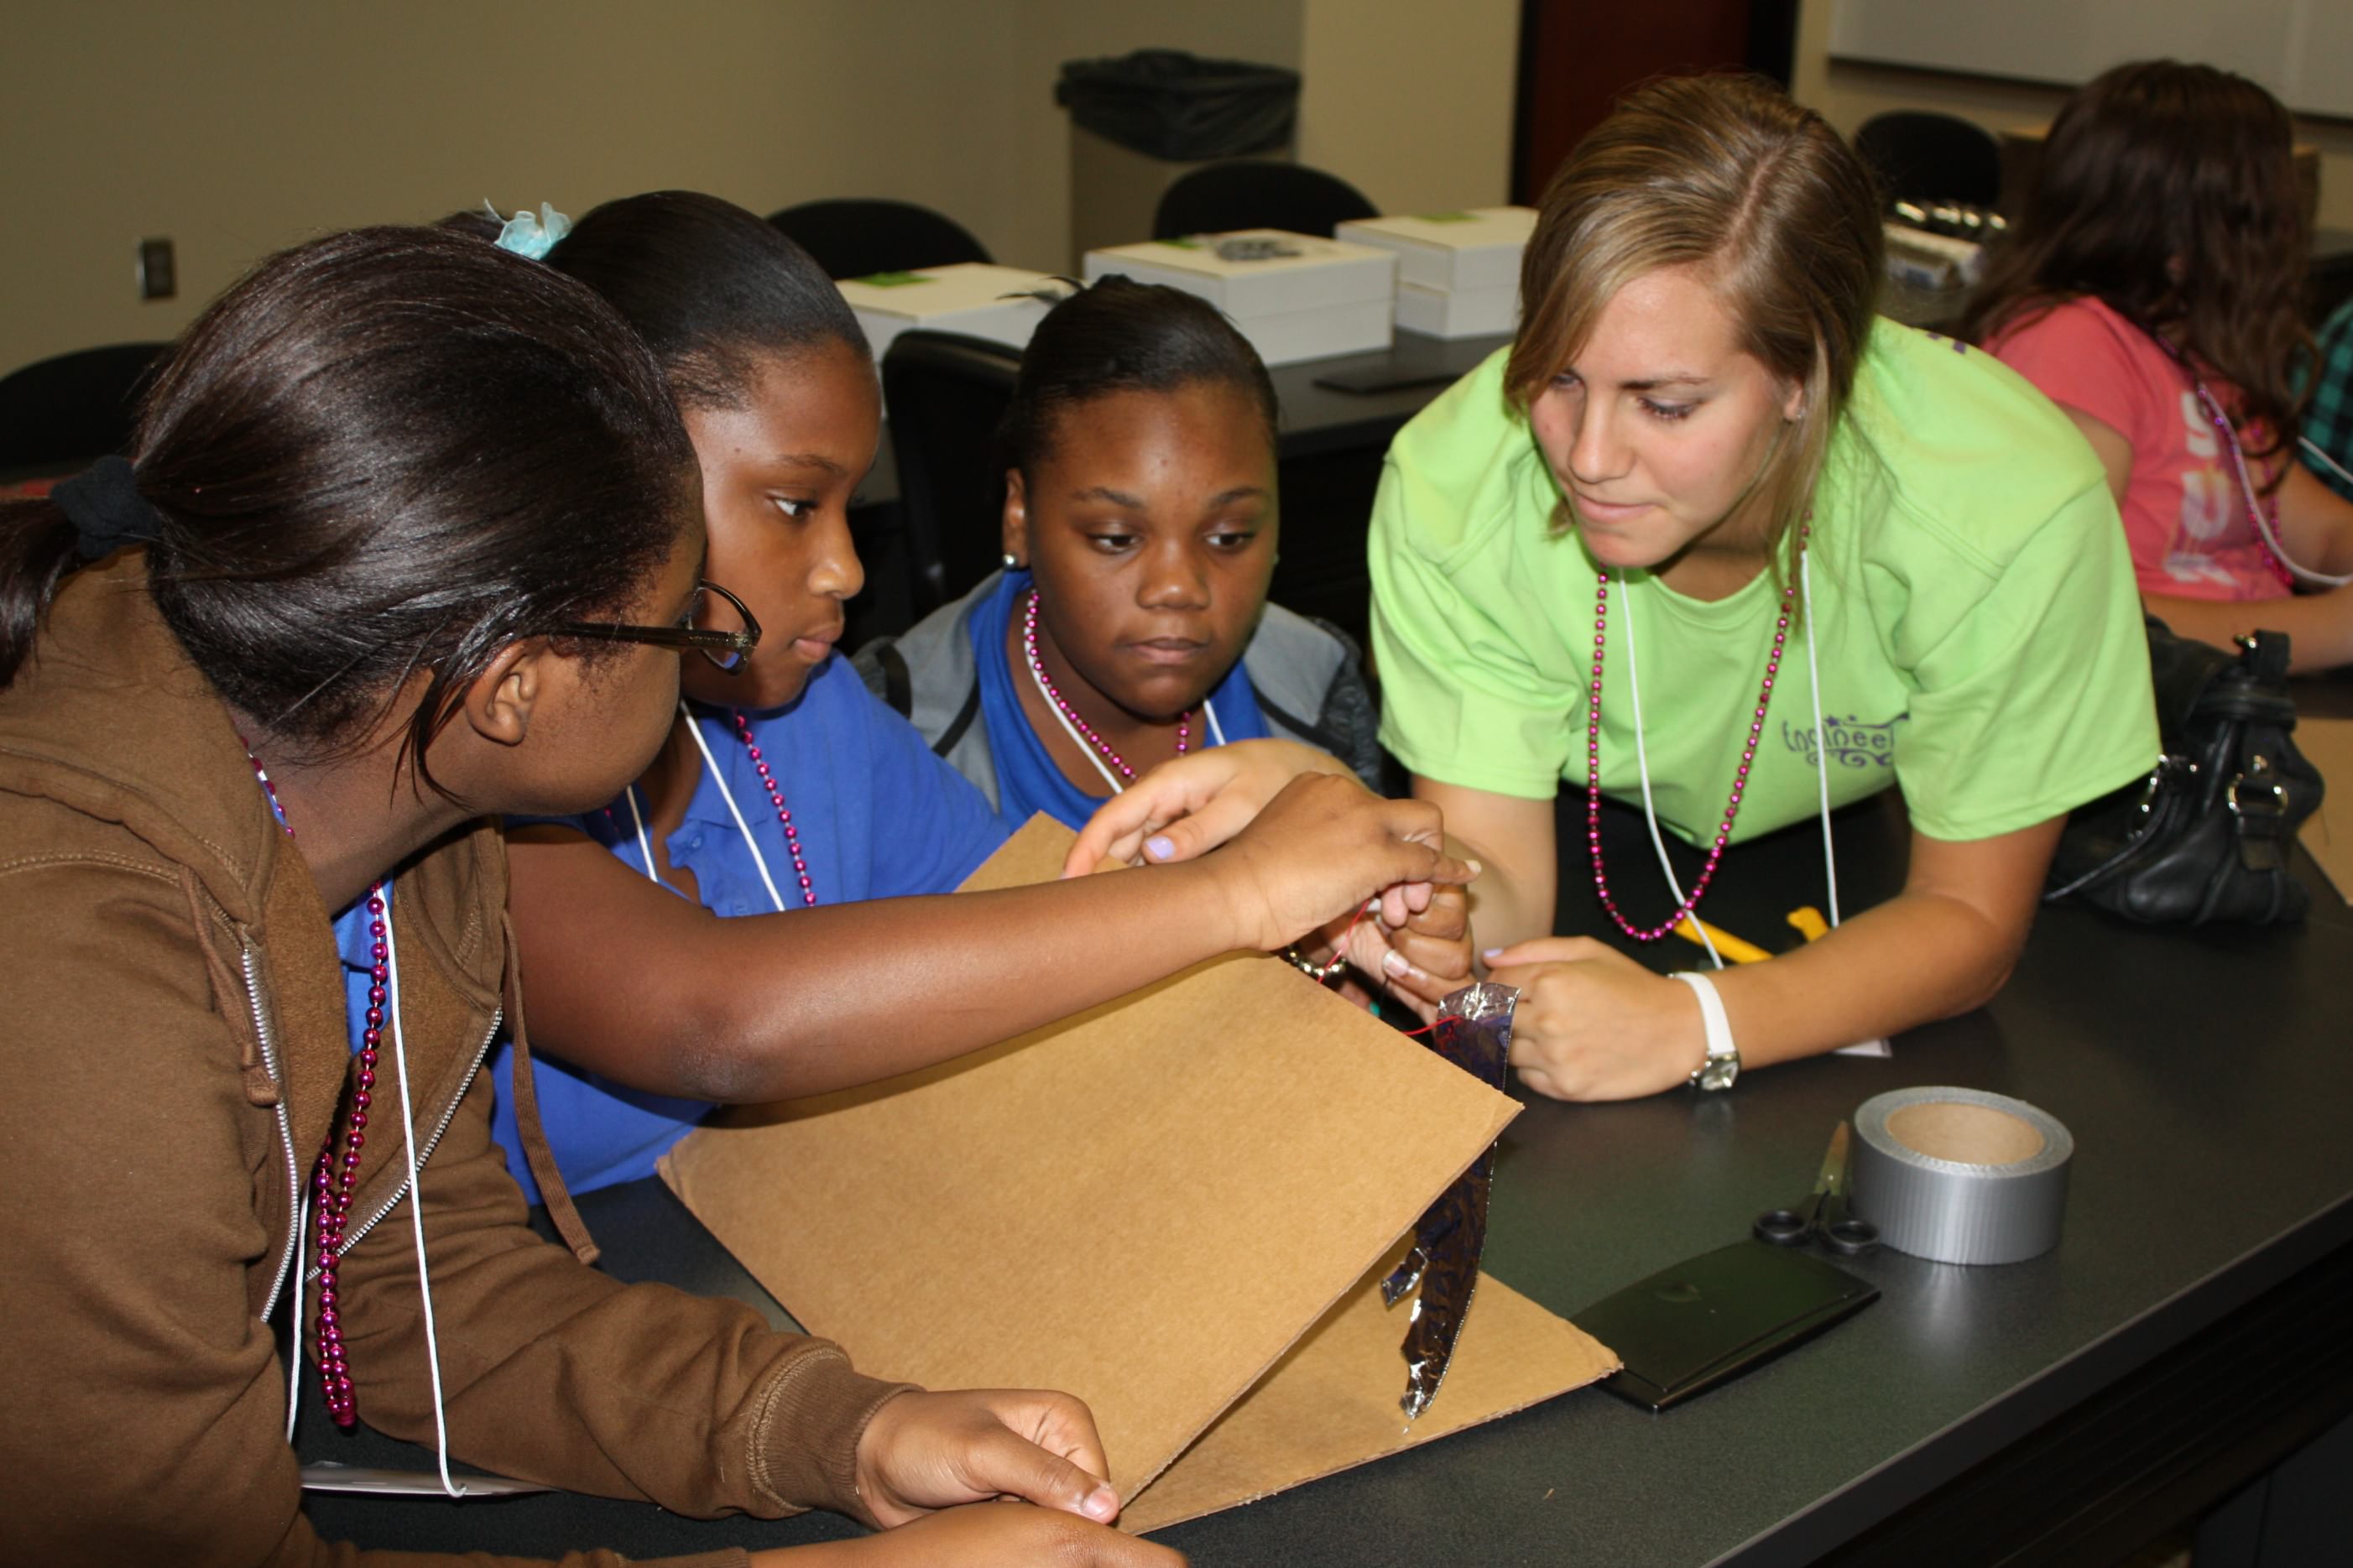 UA Women Engineers to Host Event for Middle School Girls